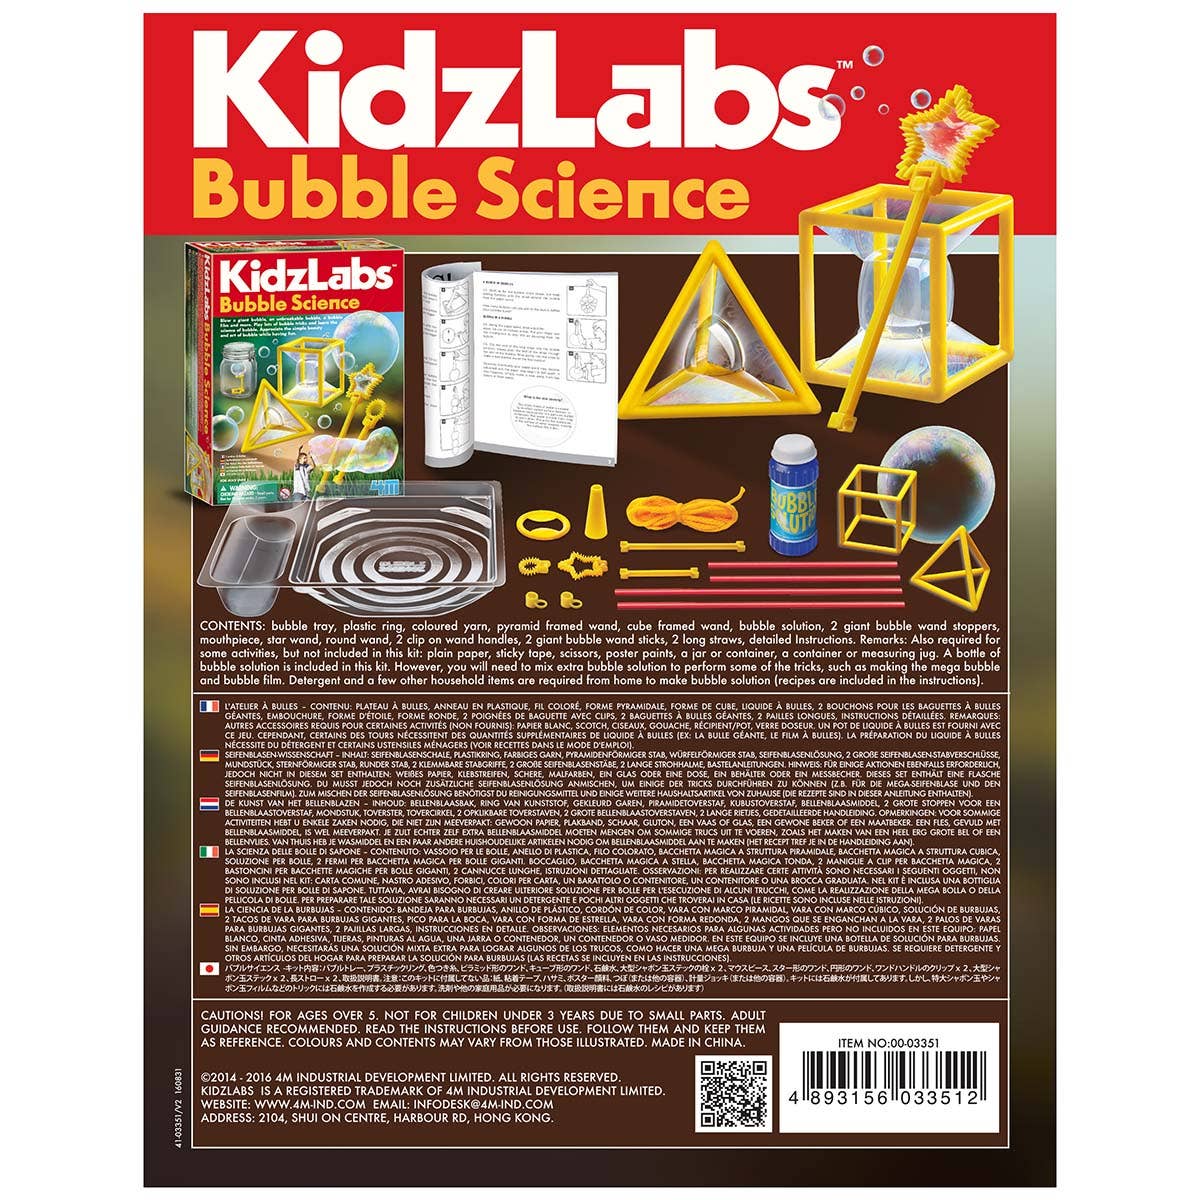 Back view of the packaging of the Bubble Science Kit, showing the materials included.